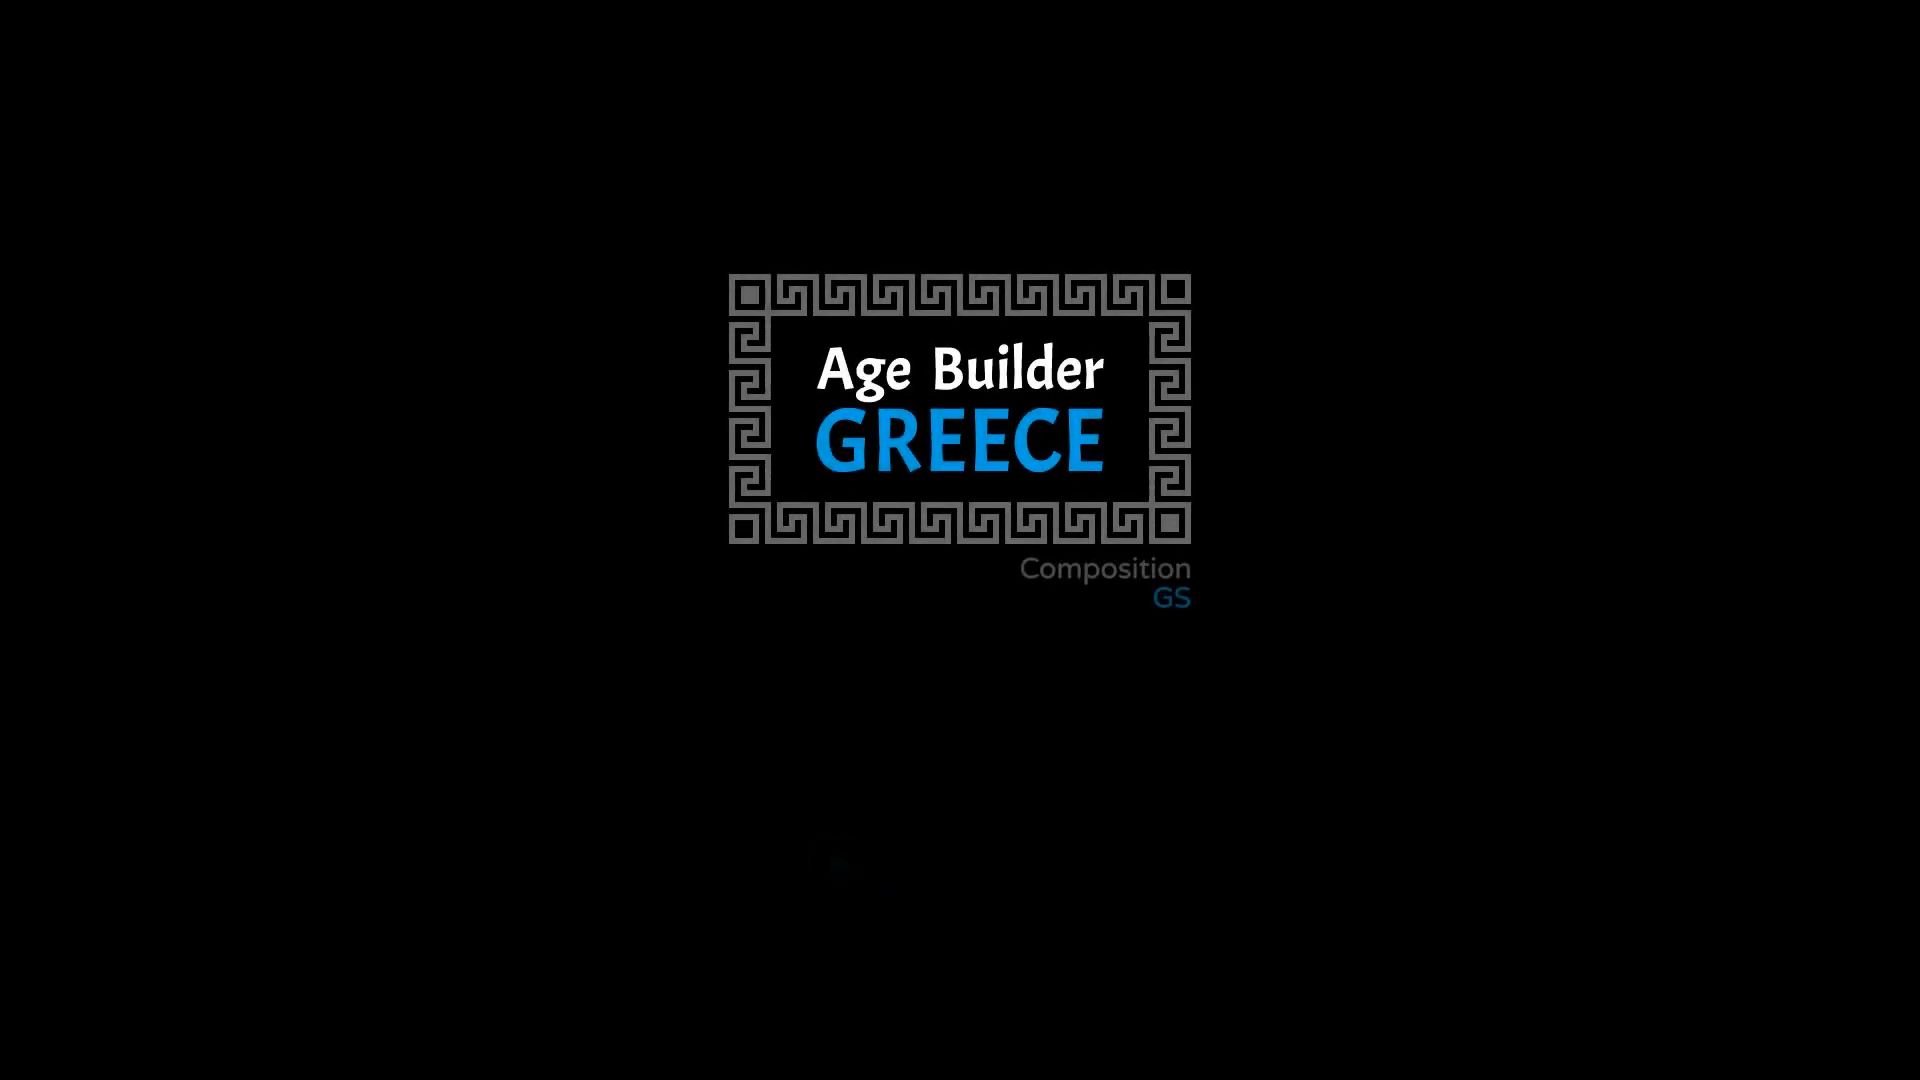 Age Builder Greece for Android